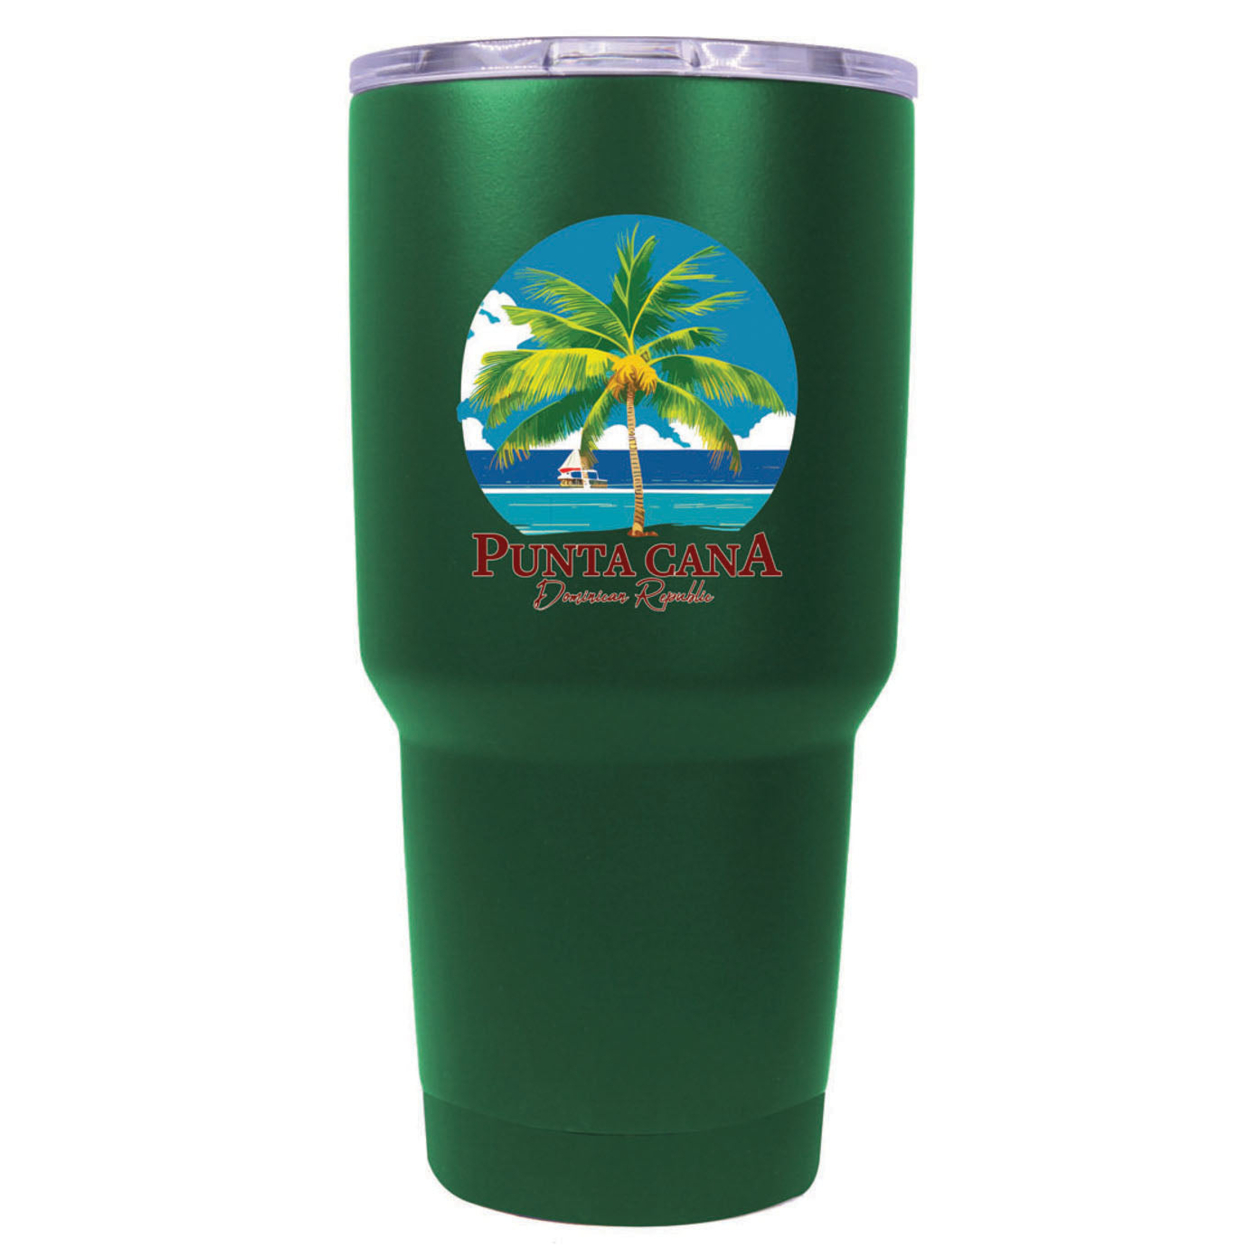 Punta Cana Dominican Republic Souvenir 24 Oz Insulated Stainless Steel Tumbler - Green, PALM